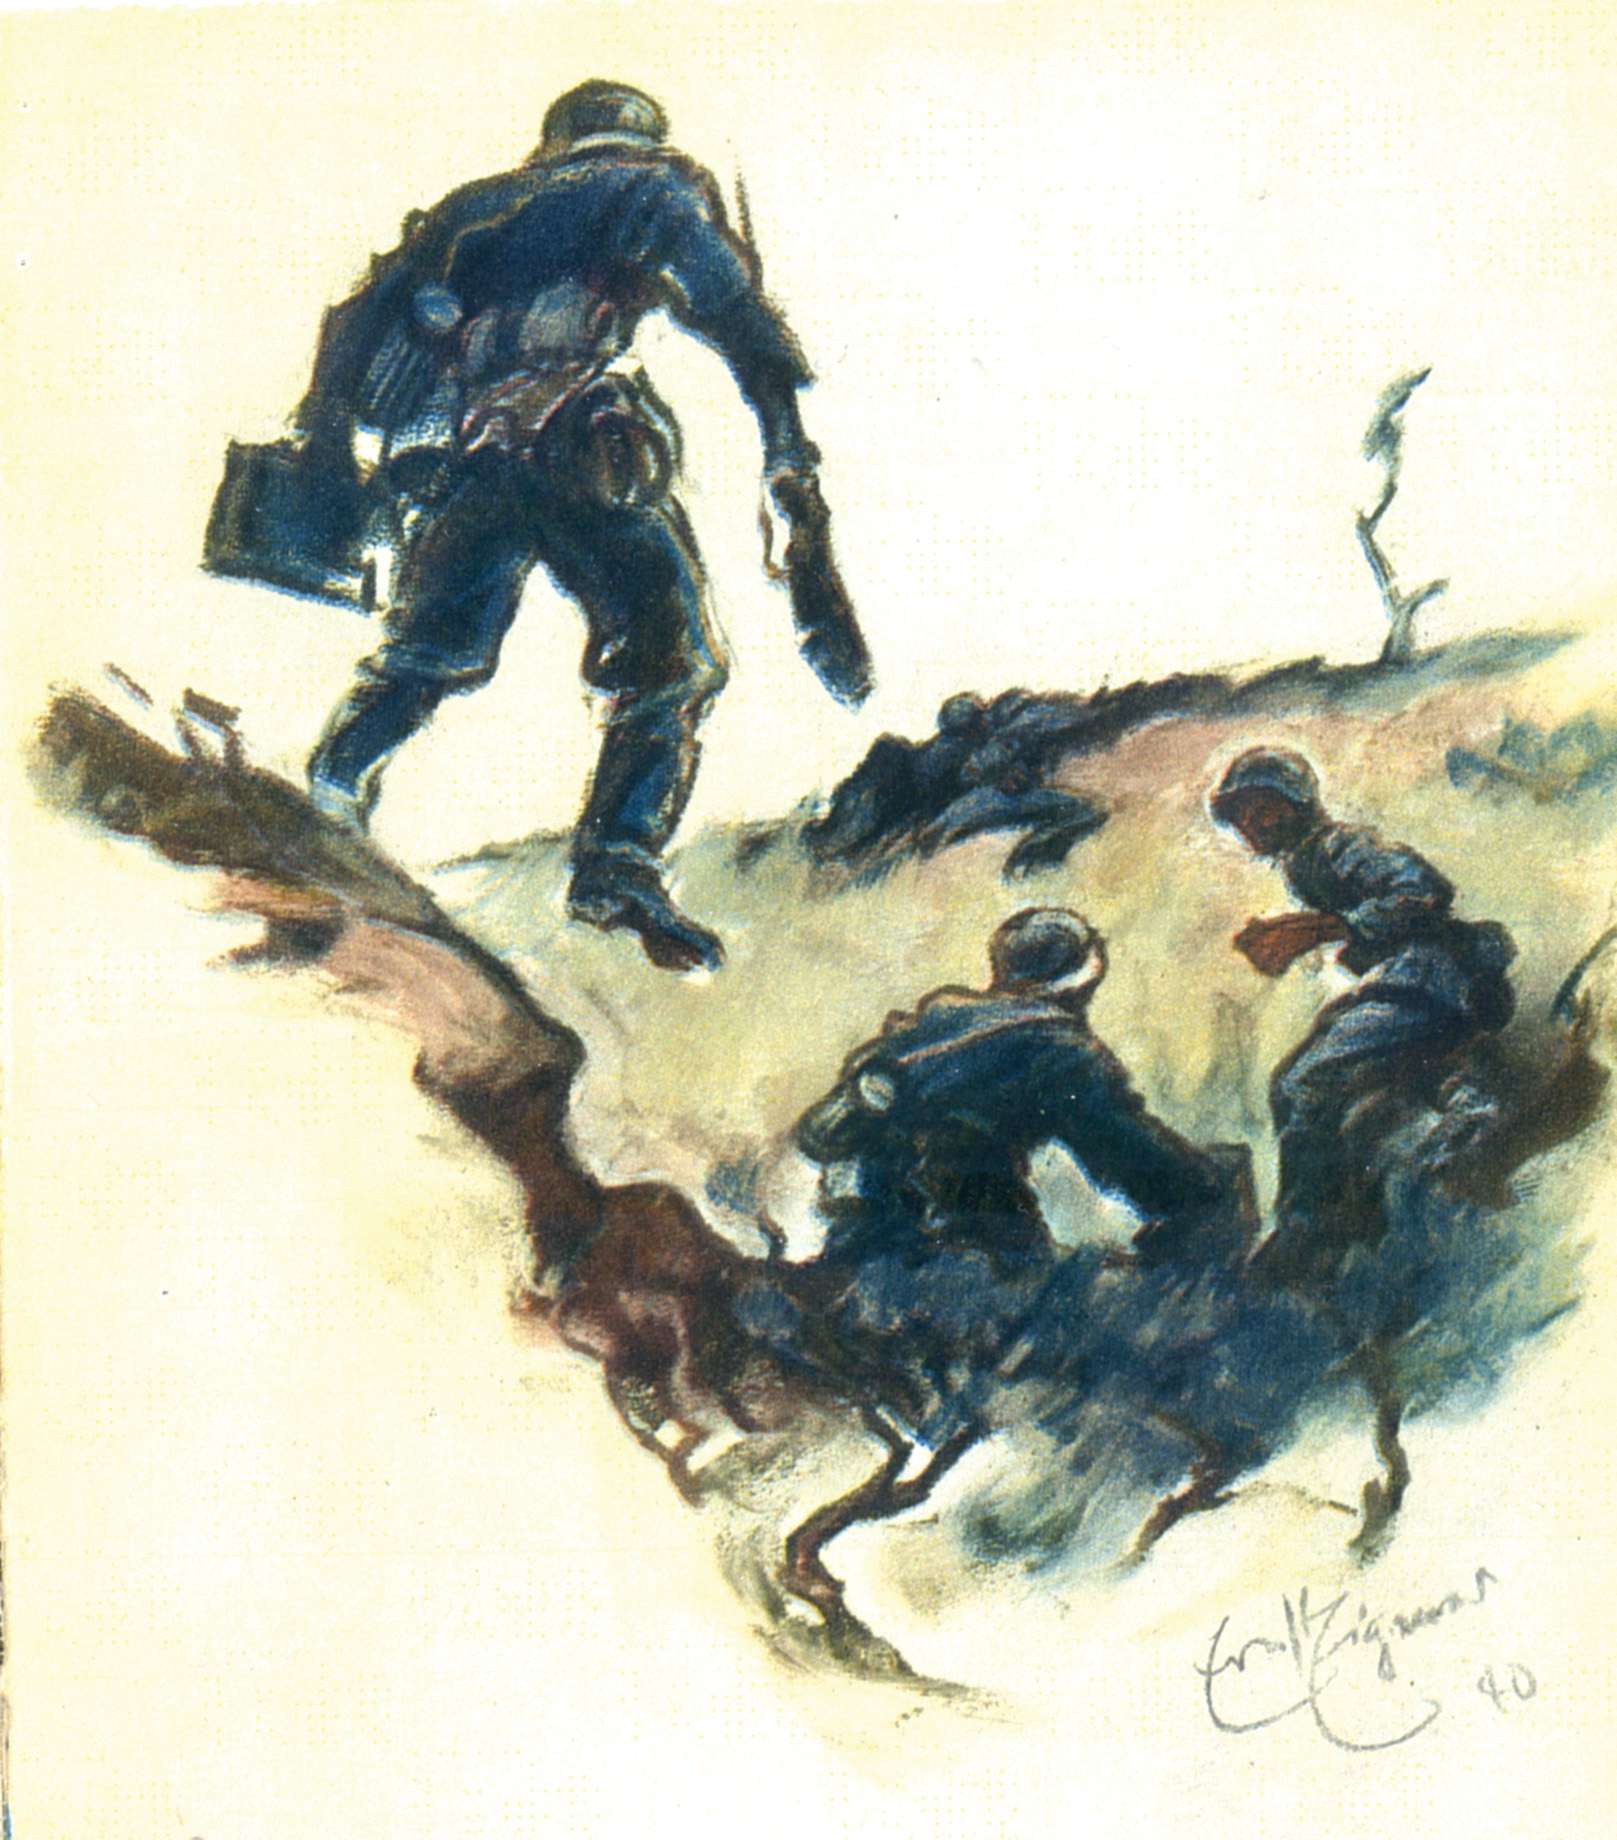 A soldier carrying an ammunition box and a weapon leaps into a postion occupied by two of his comrades. By showing the men from the back, almost as silhouettes, Eigener obscures their humanity and reduces them to anonymous cogs in the Third Reich’s war machine. 